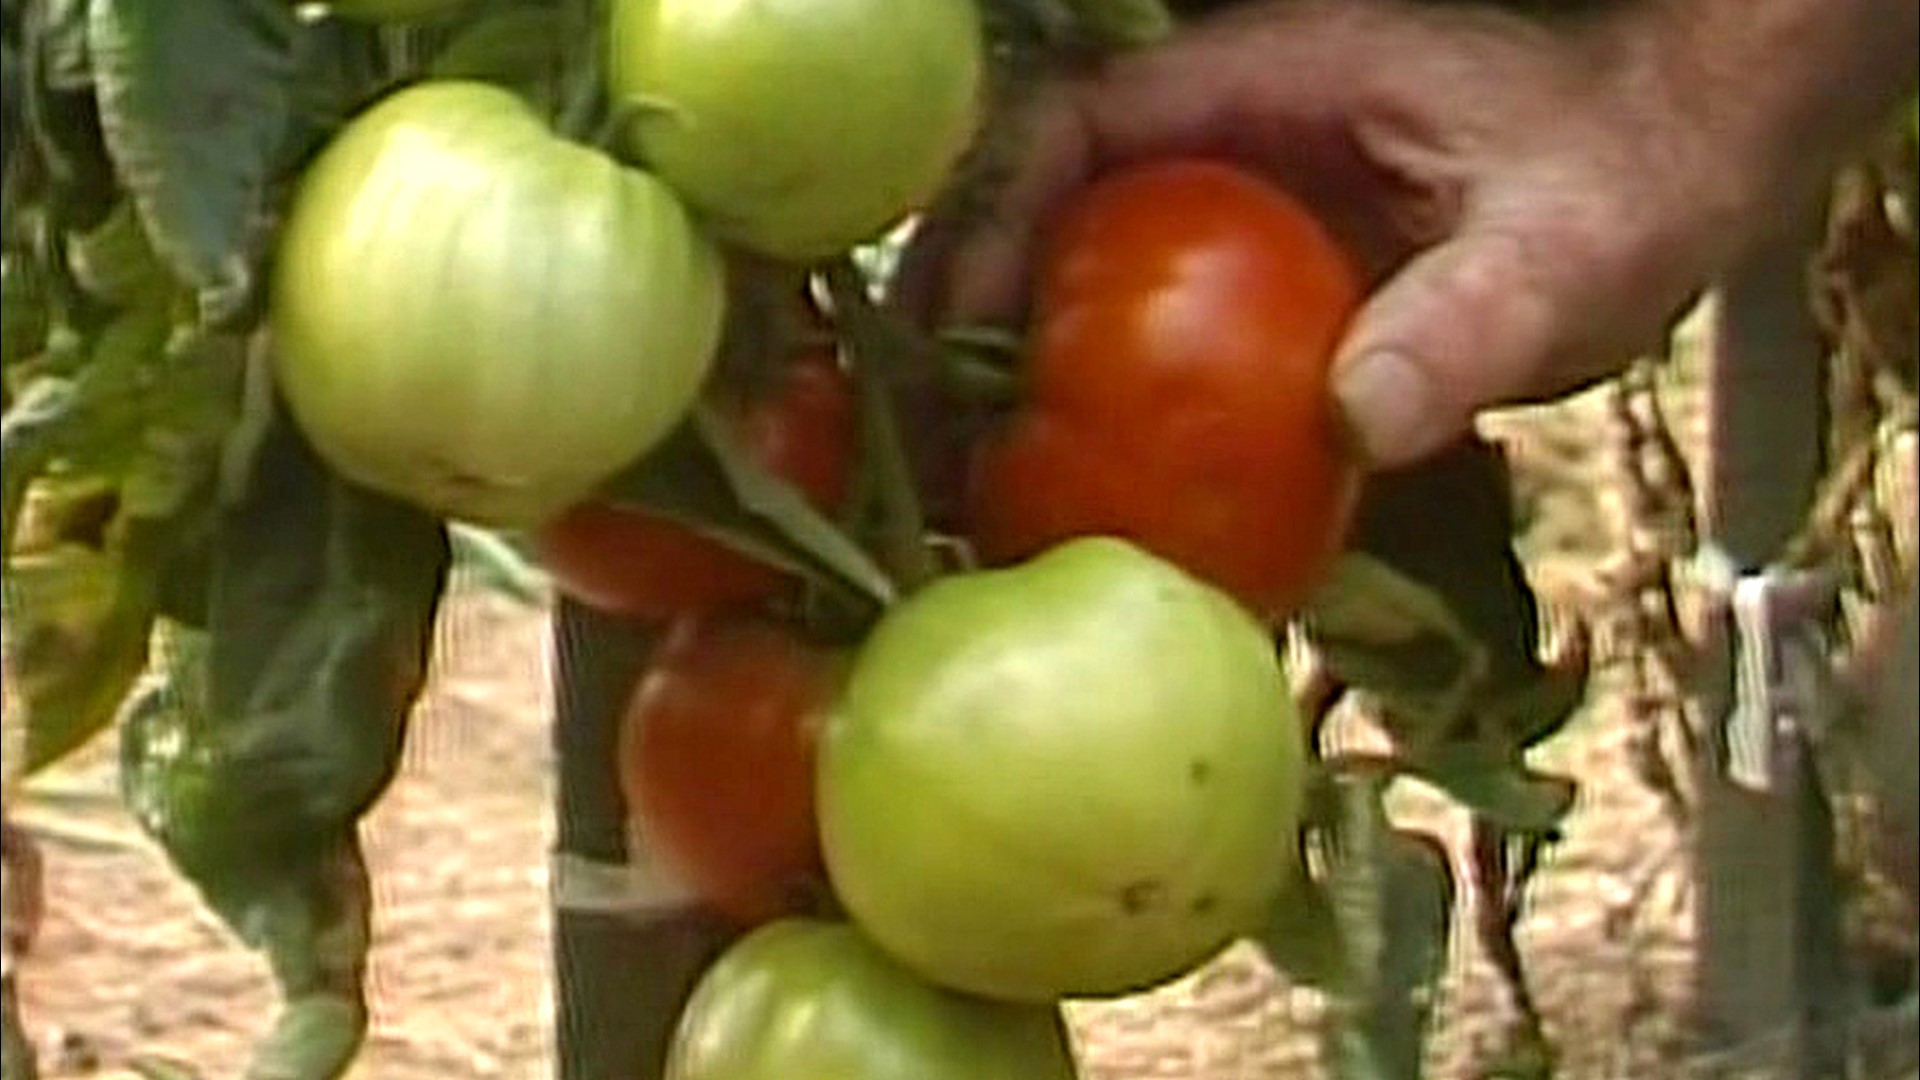 Homegrown tomatoes have always been a tradition in our area.